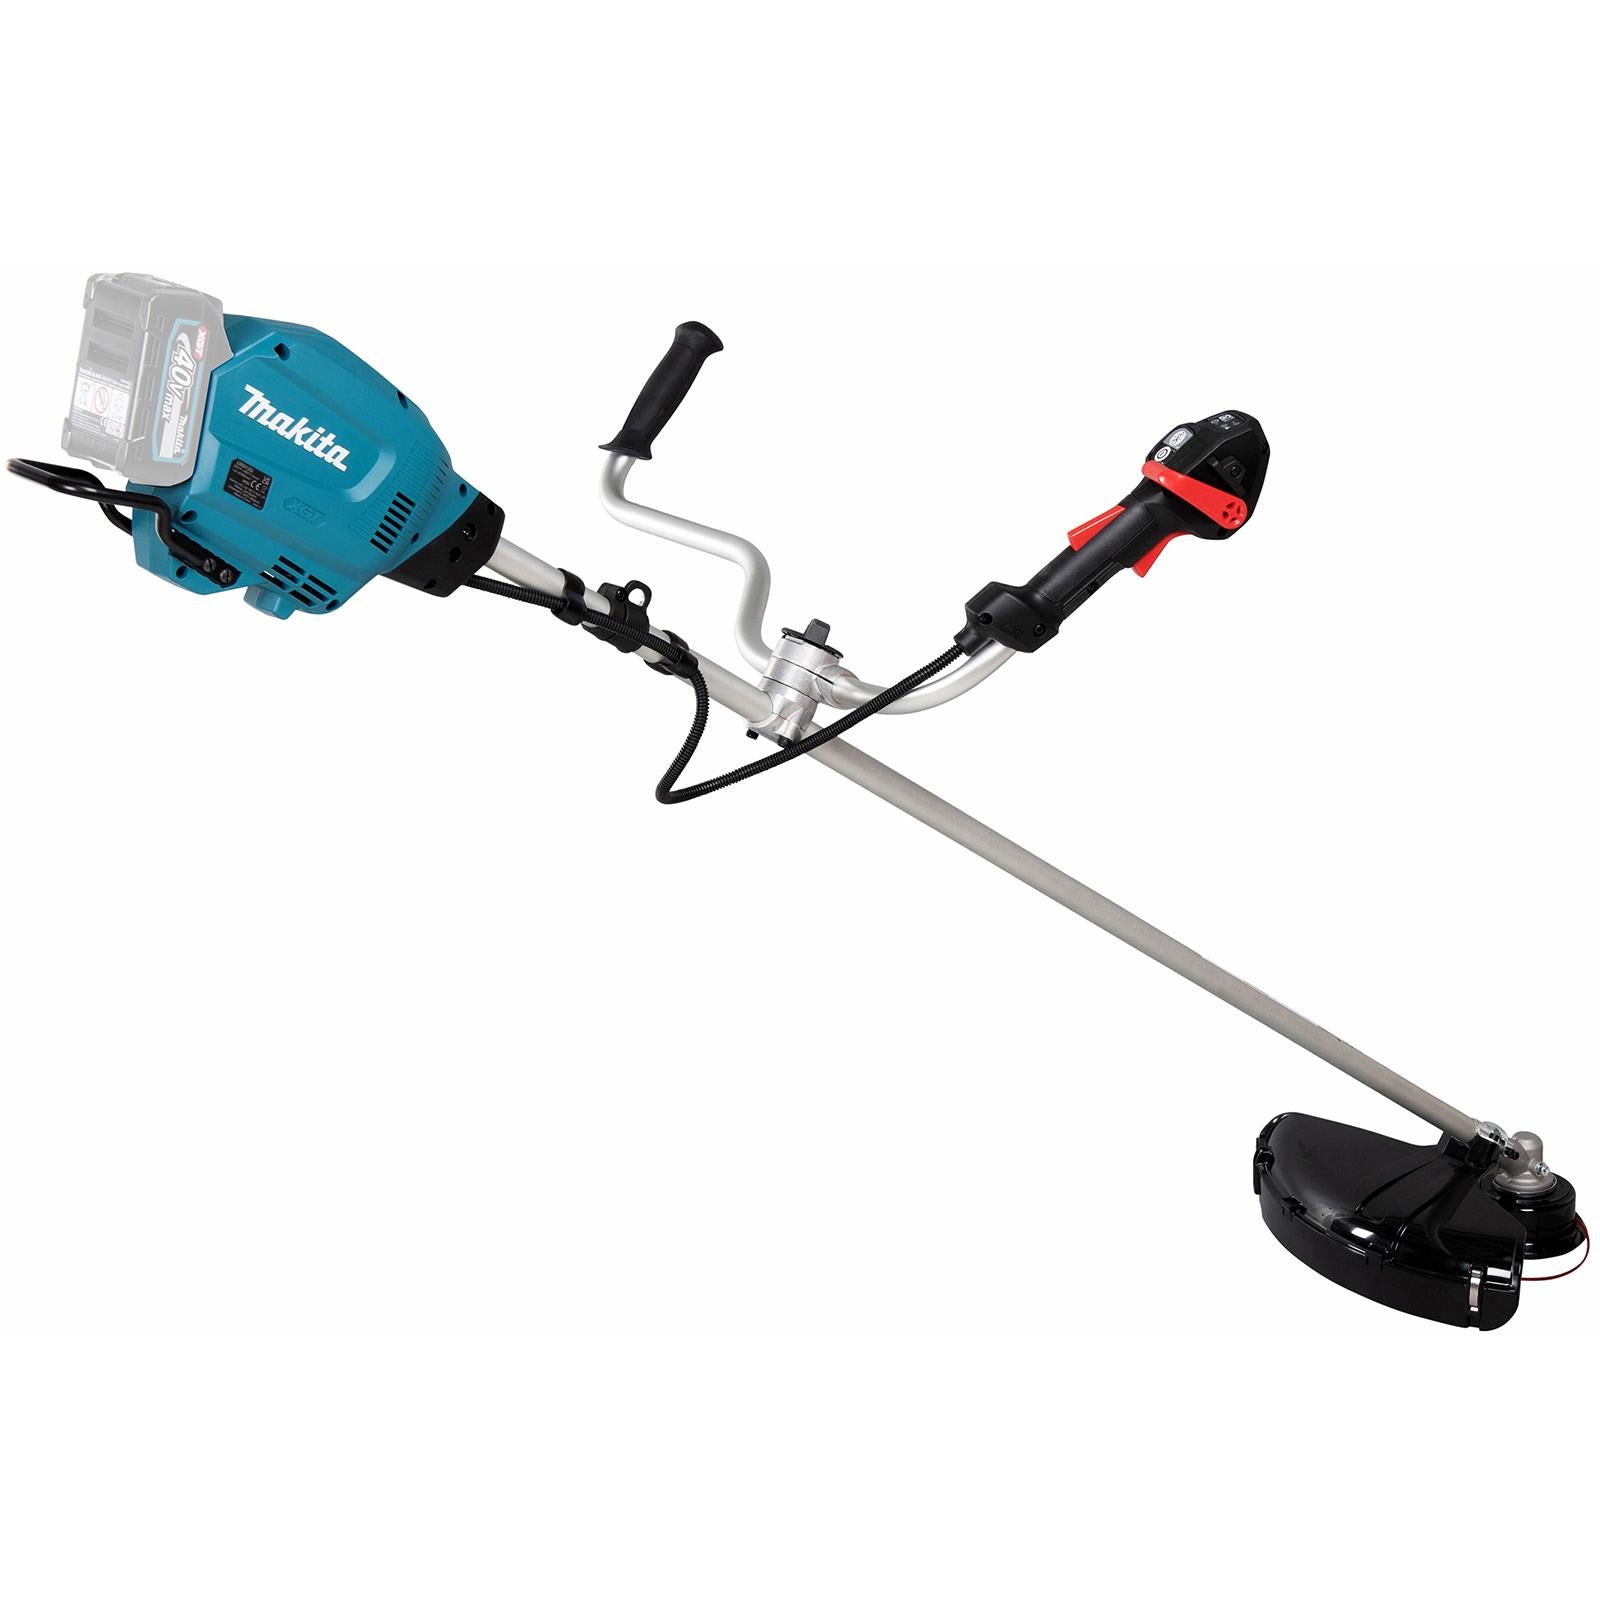 Makita Brush Cutter Kit 40V XGT Li-ion Brushless Cordless Garden Lawn Strimmer Strimming 2 x 5Ah Battery and Rapid Charger UR013GT206